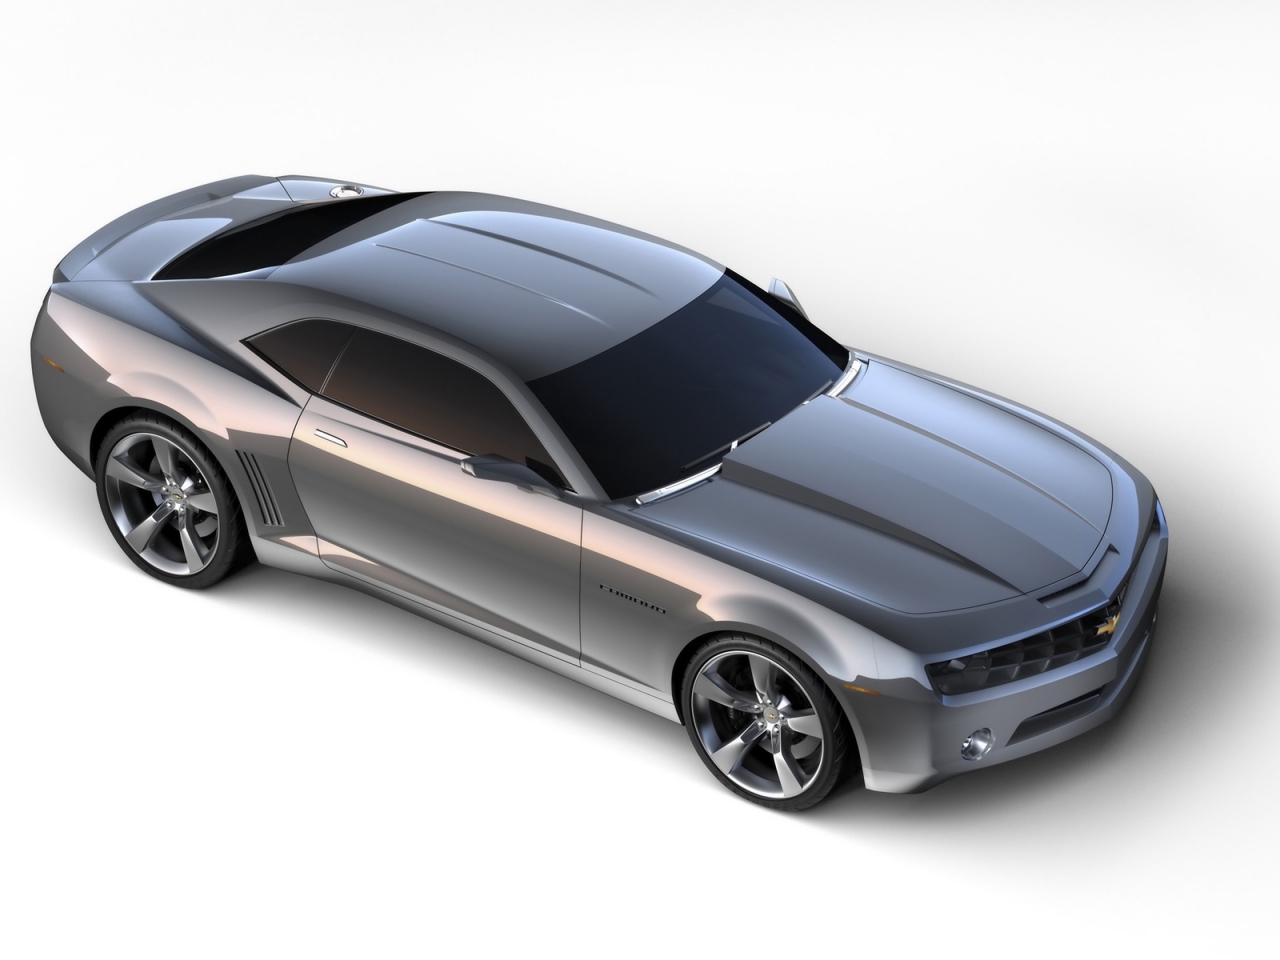 Chevrolet Camaro Grey Side Angle for 1280 x 960 resolution